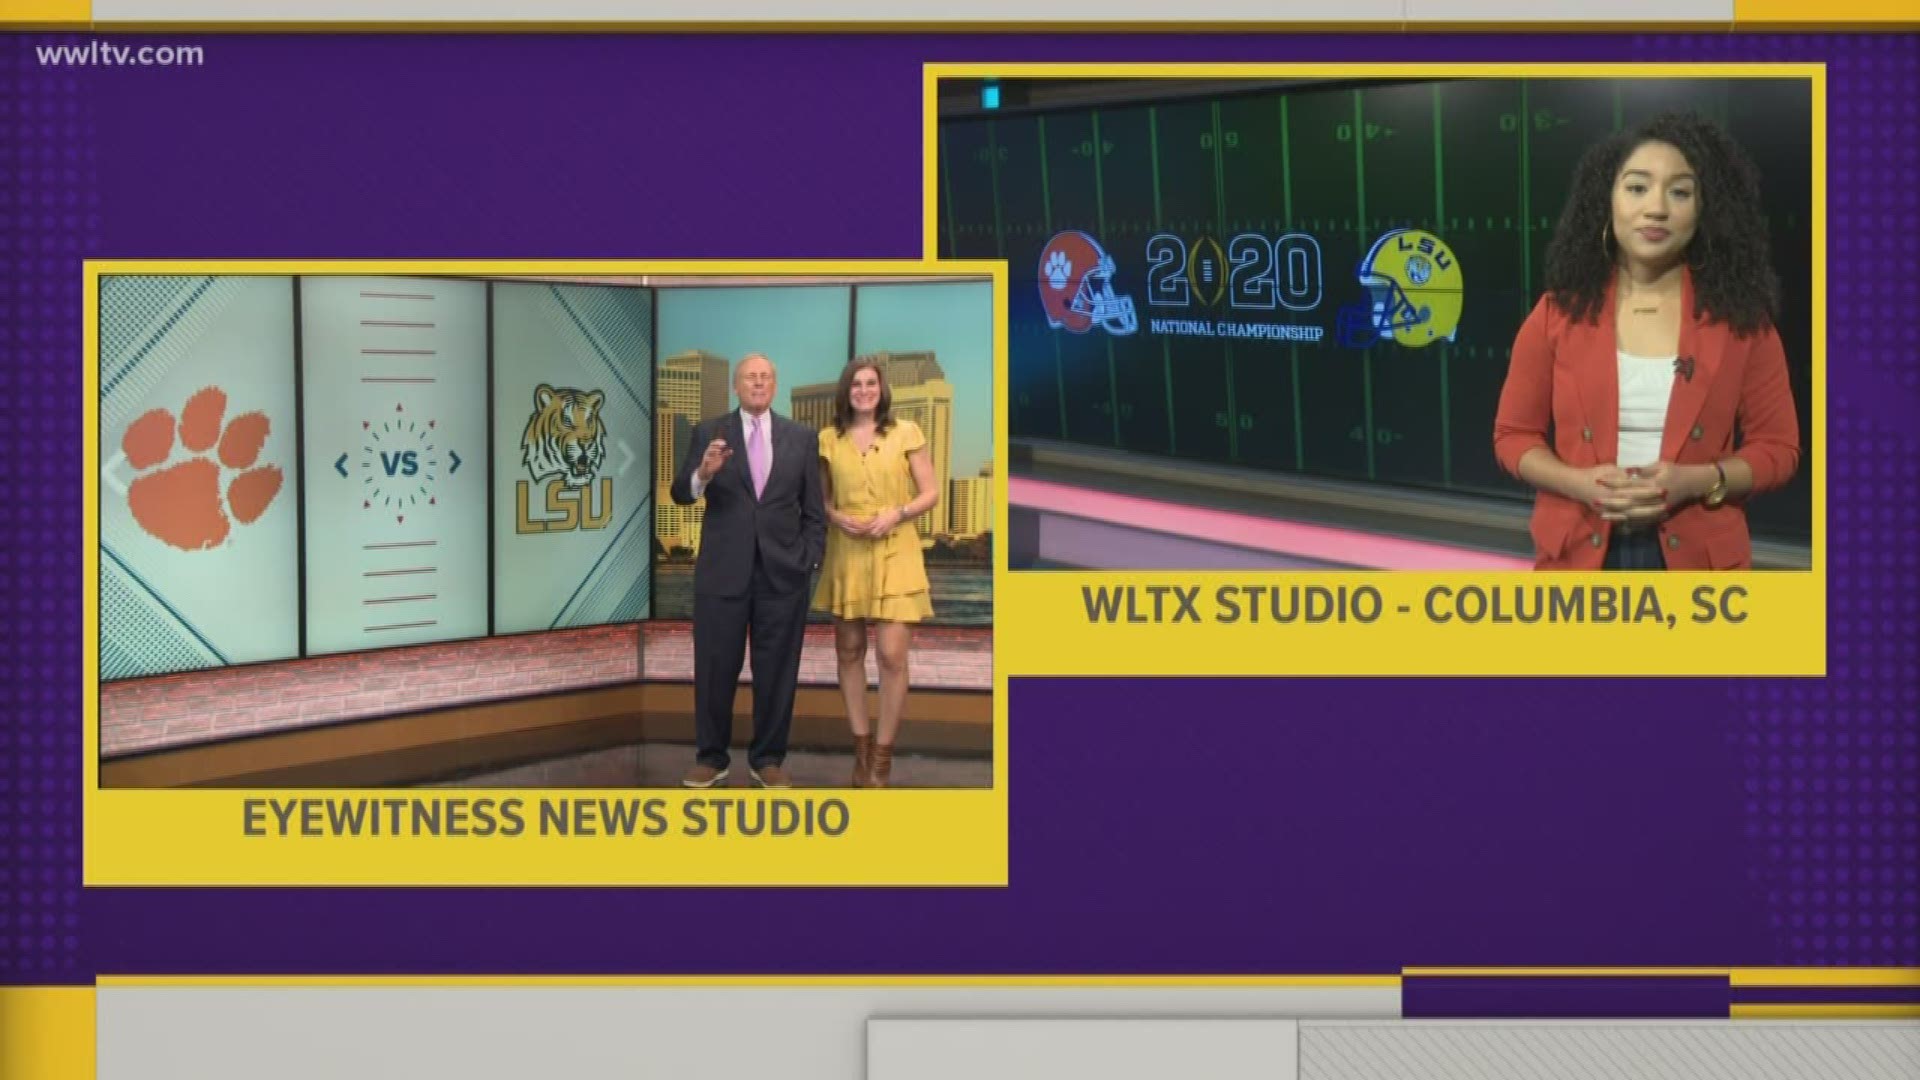 Watch as we place a friendly bet with our WLTX family ahead of the big LSU/Clemson matchup in the dome.